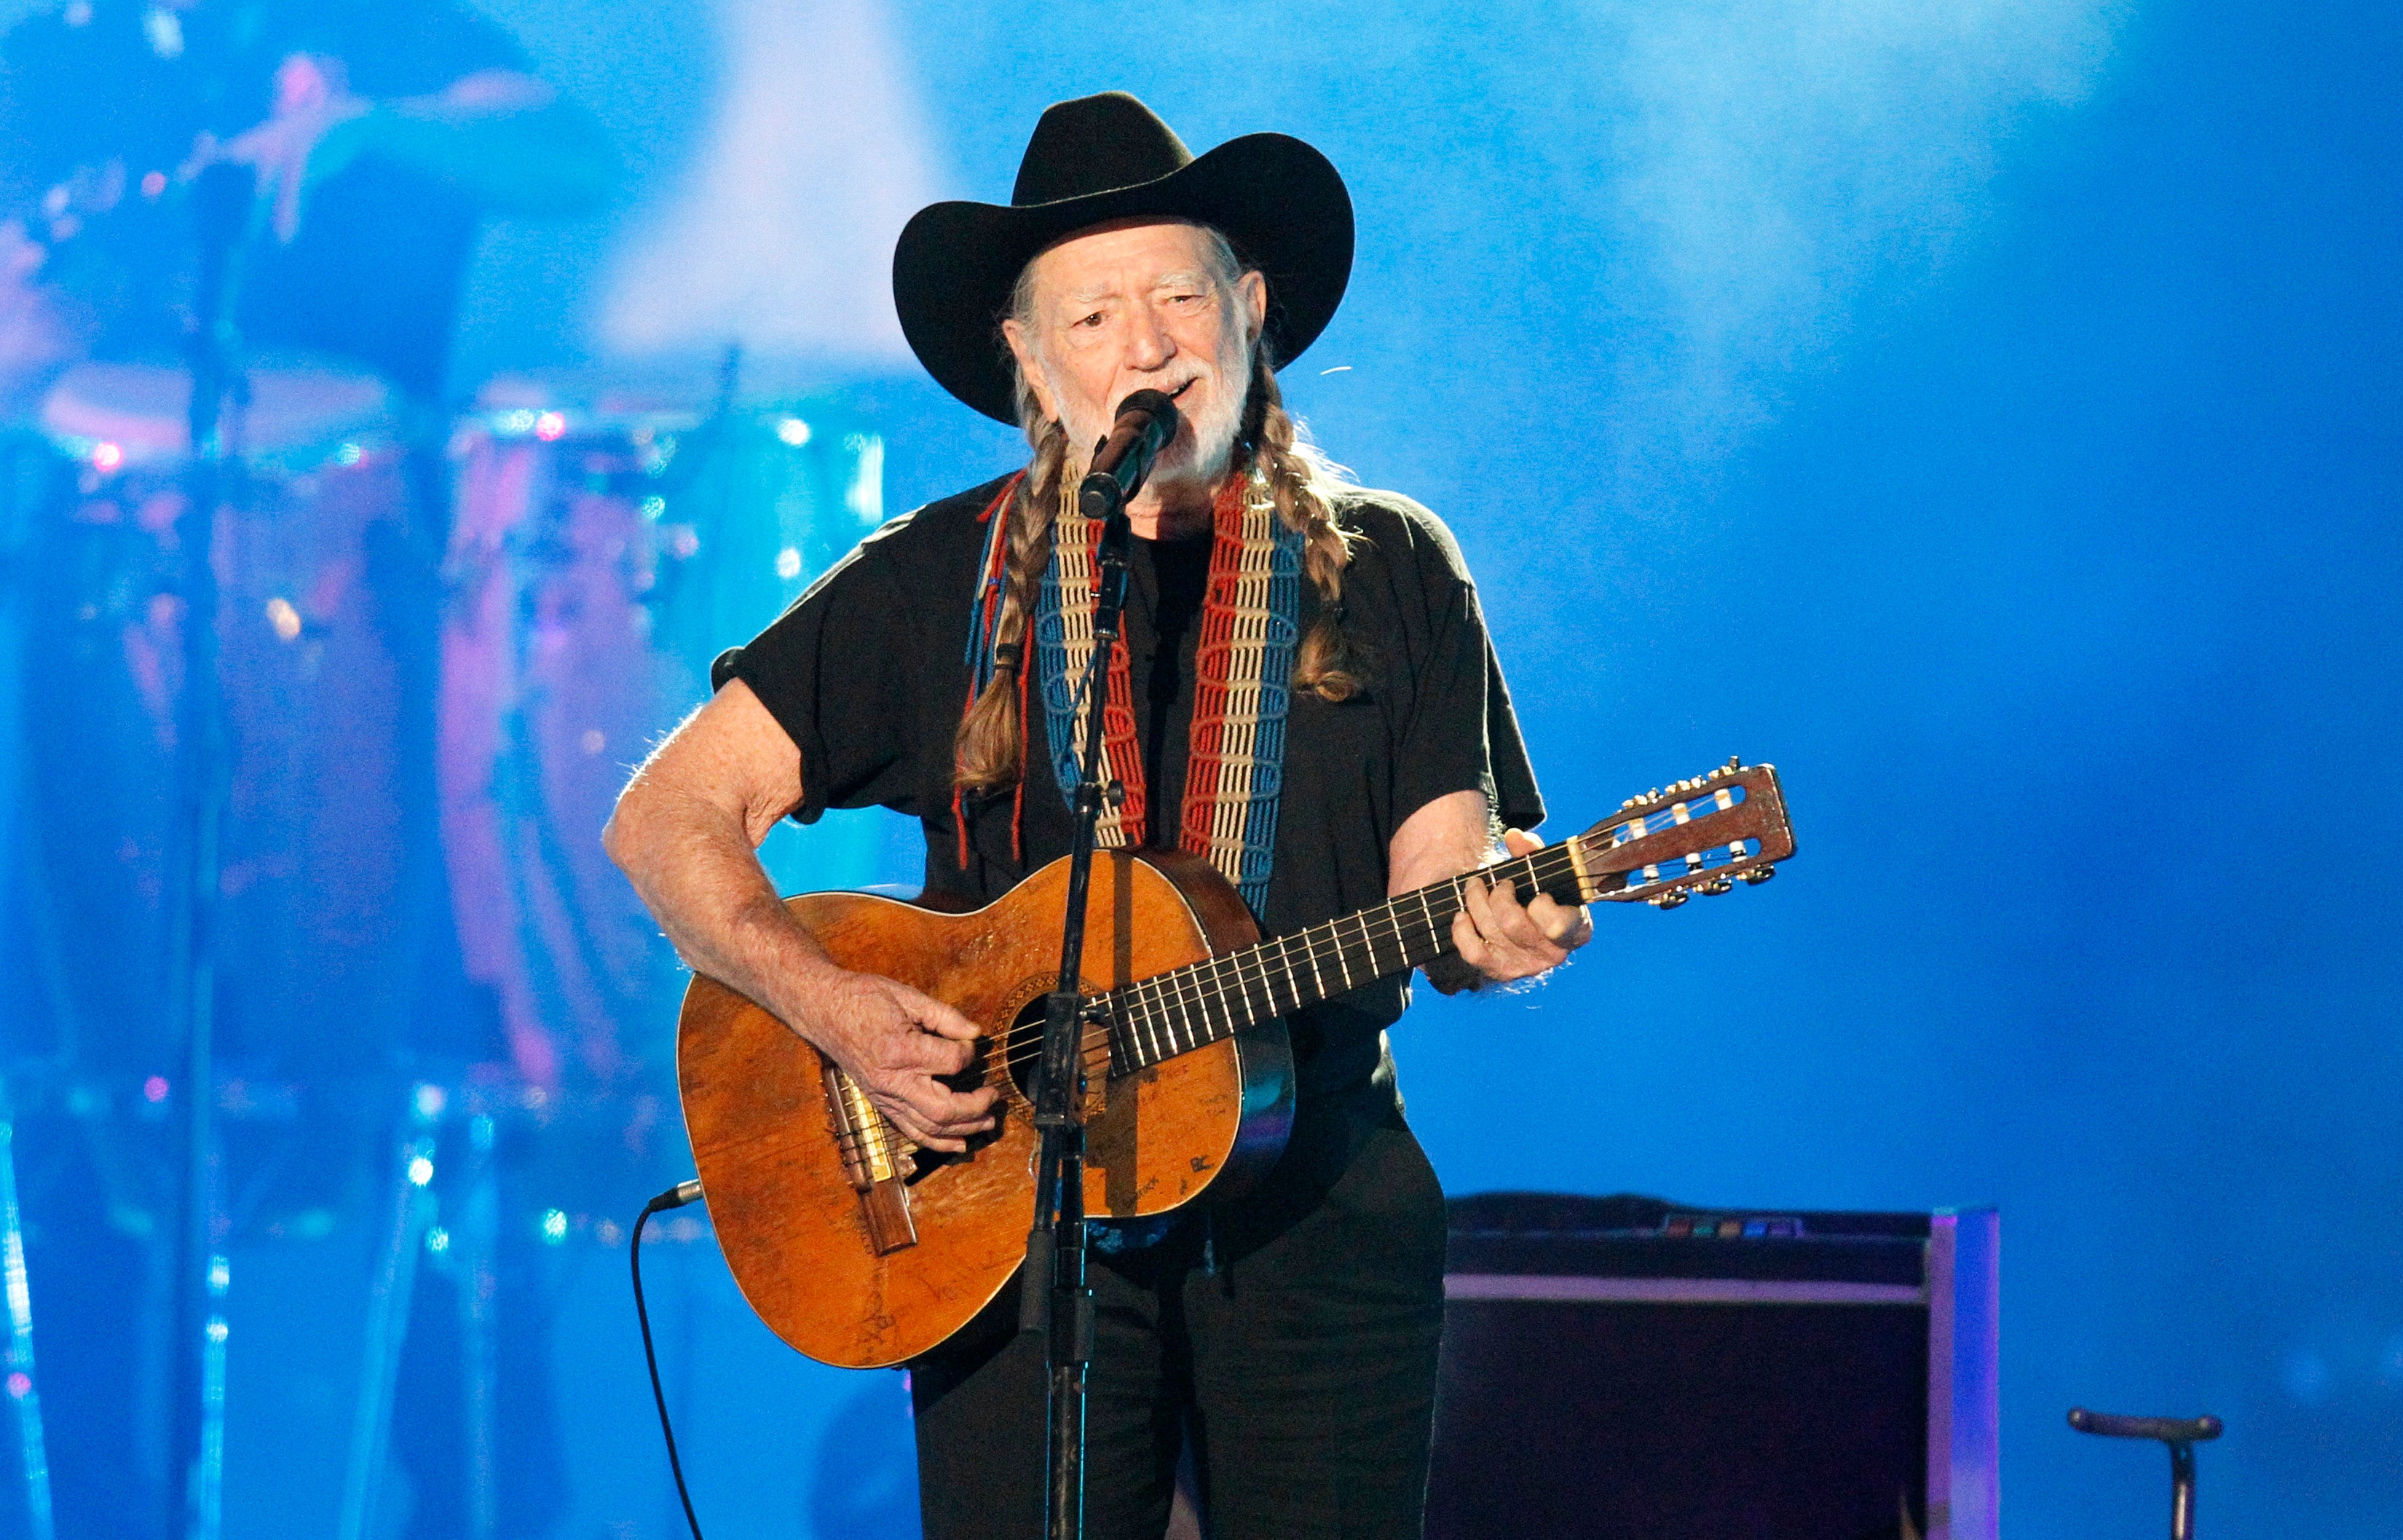 Toy armadillo stolen in New York after Willie Nelson concert | Fox News